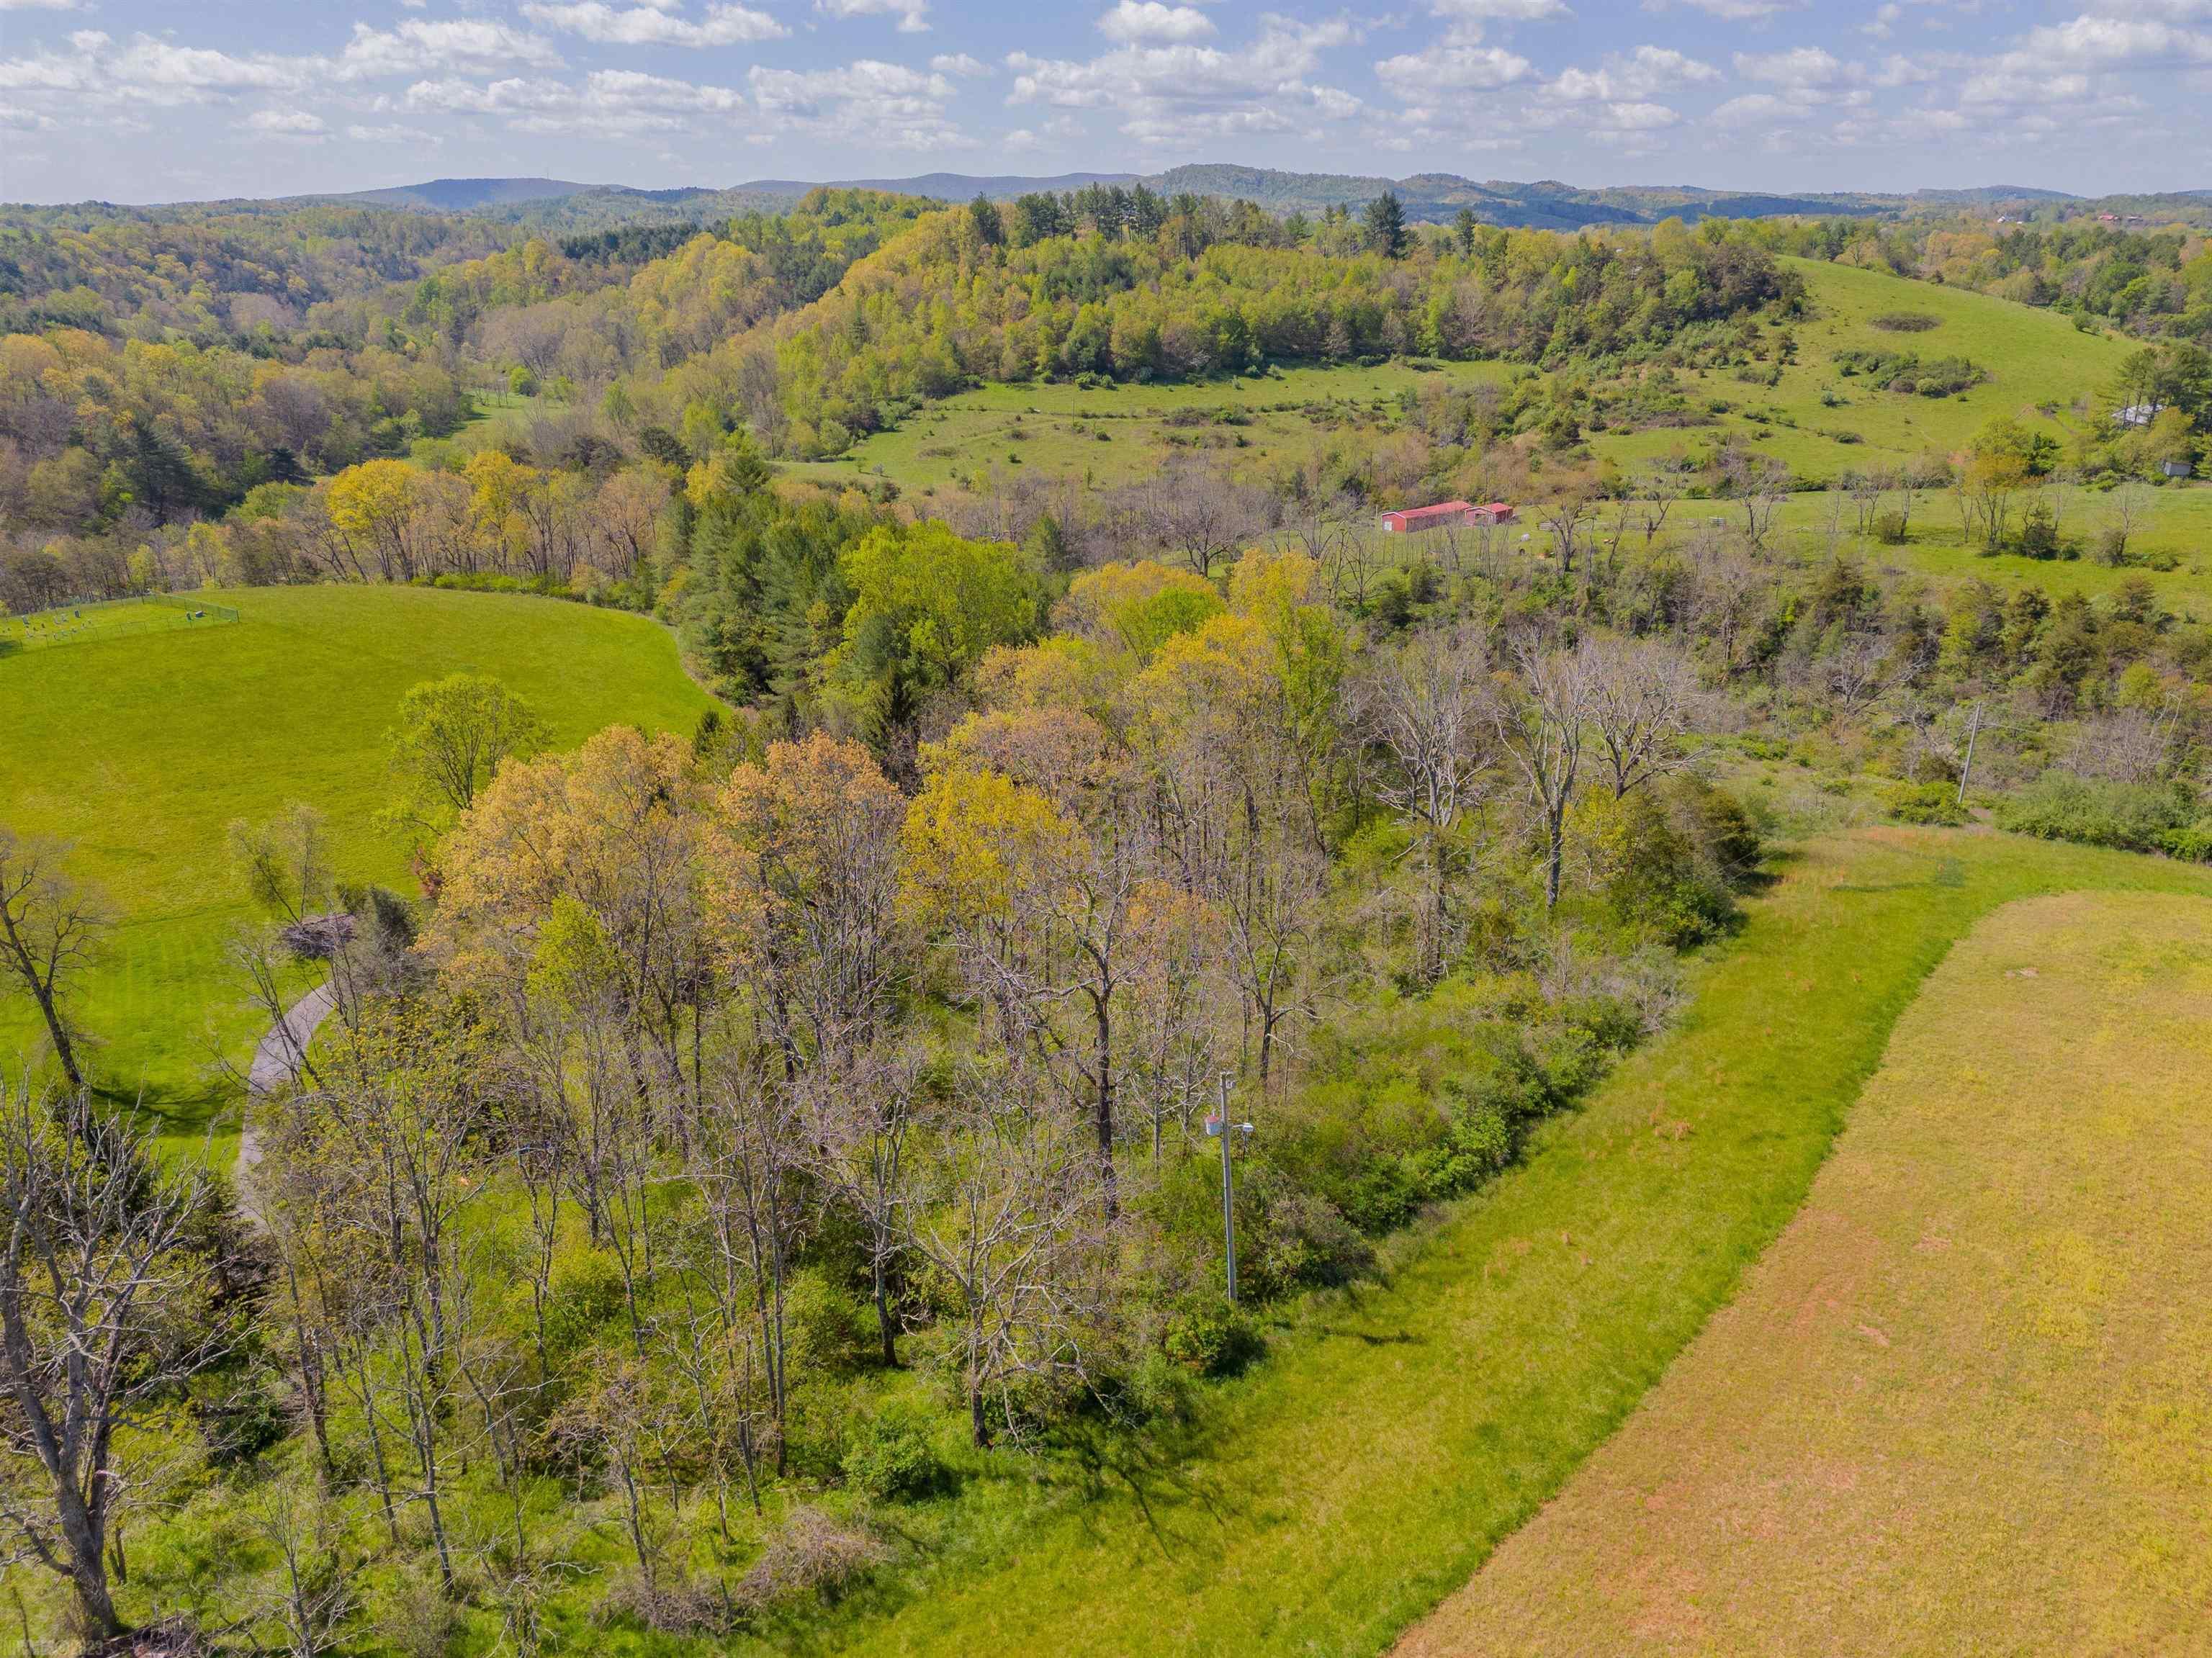 Awesome Opportunity to build your dream home on over 2 acres located in Auburn School district property features paved shared driveway, has gorgeous mountain views, utility hookup and has been perked for 6 bedrooms, located off state maintained road, don't miss this opportunity!